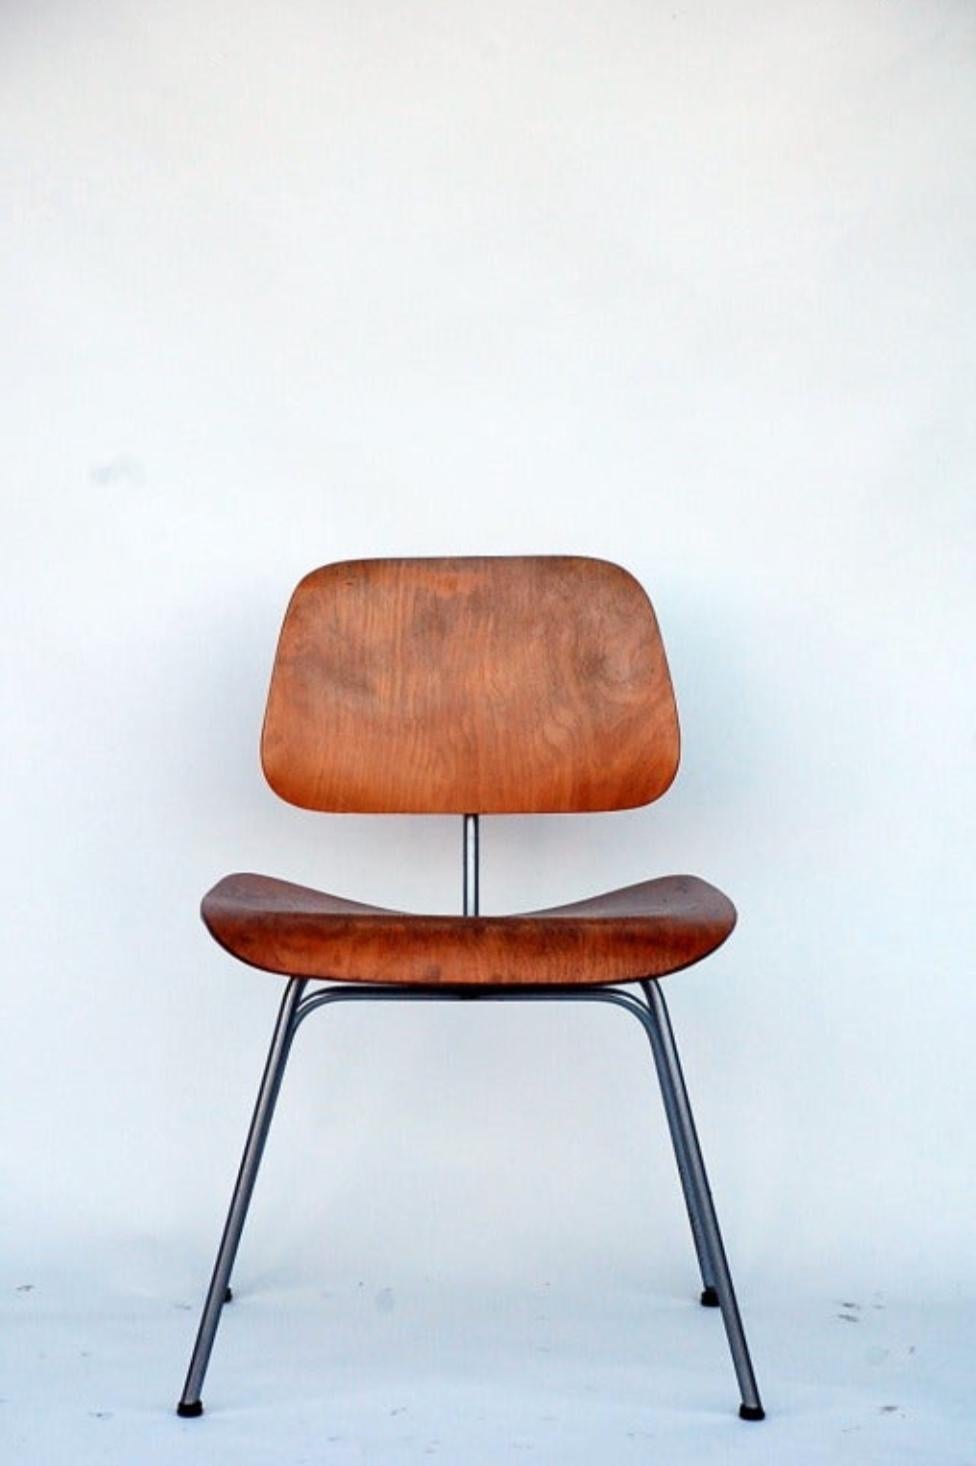 Collector's early Eames DCM chair.